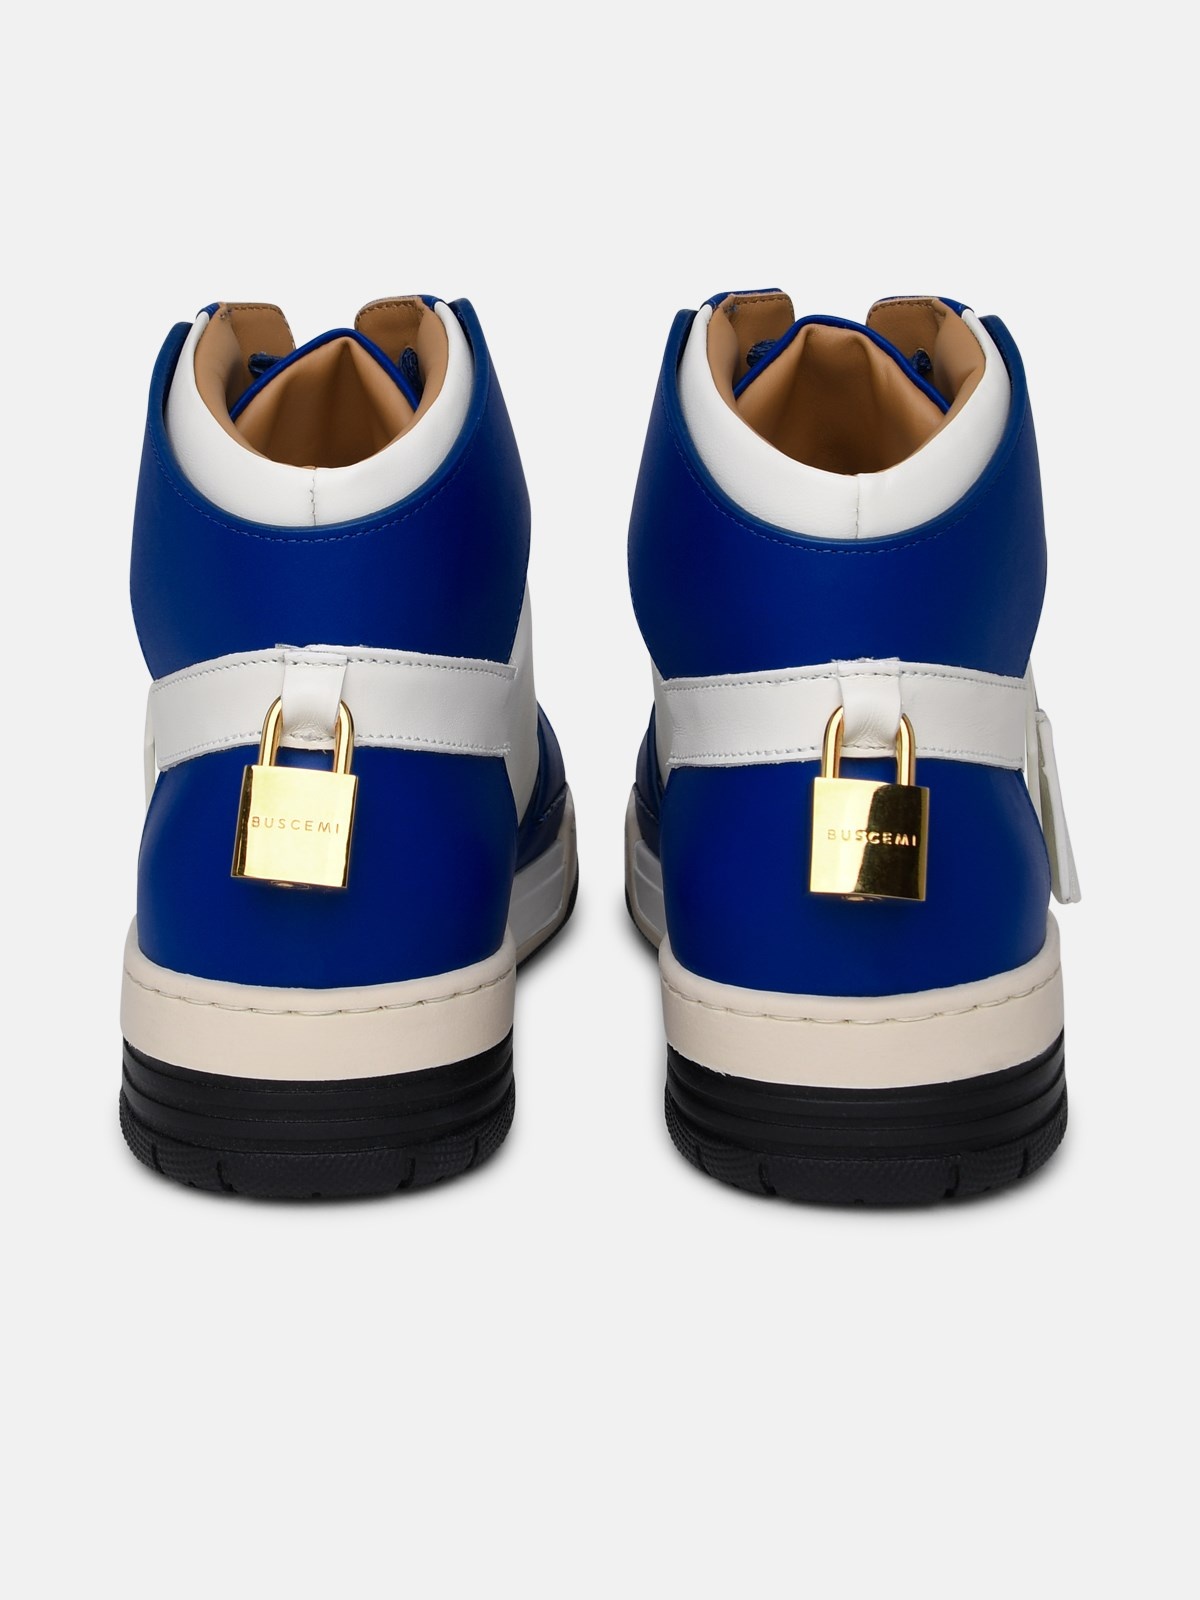 'AIR JON' WHITE AND BLUE LEATHER SNEAKERS - 4